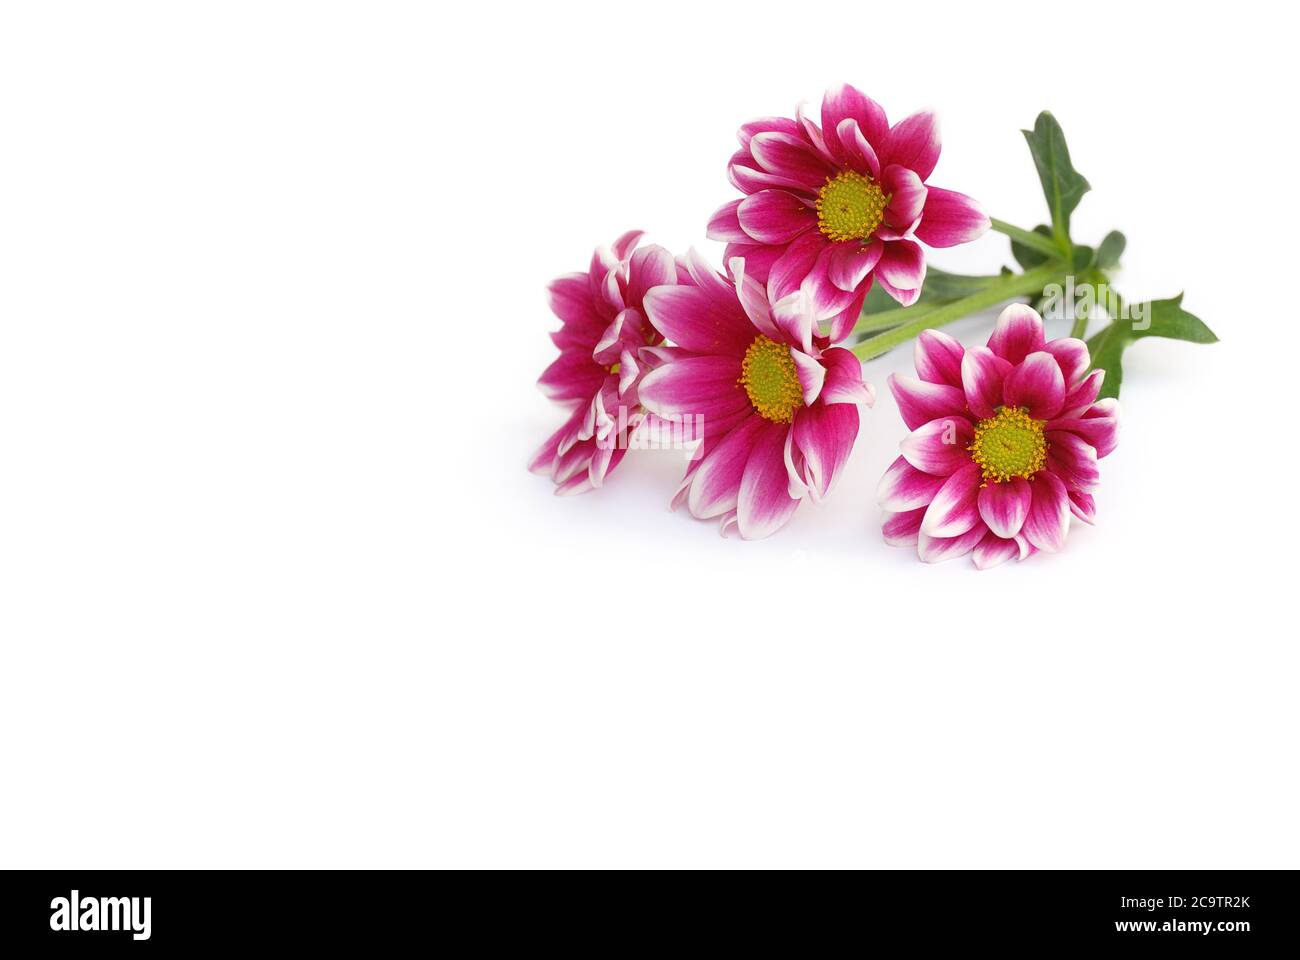 isolated cut flowers lie on white background Stock Photo